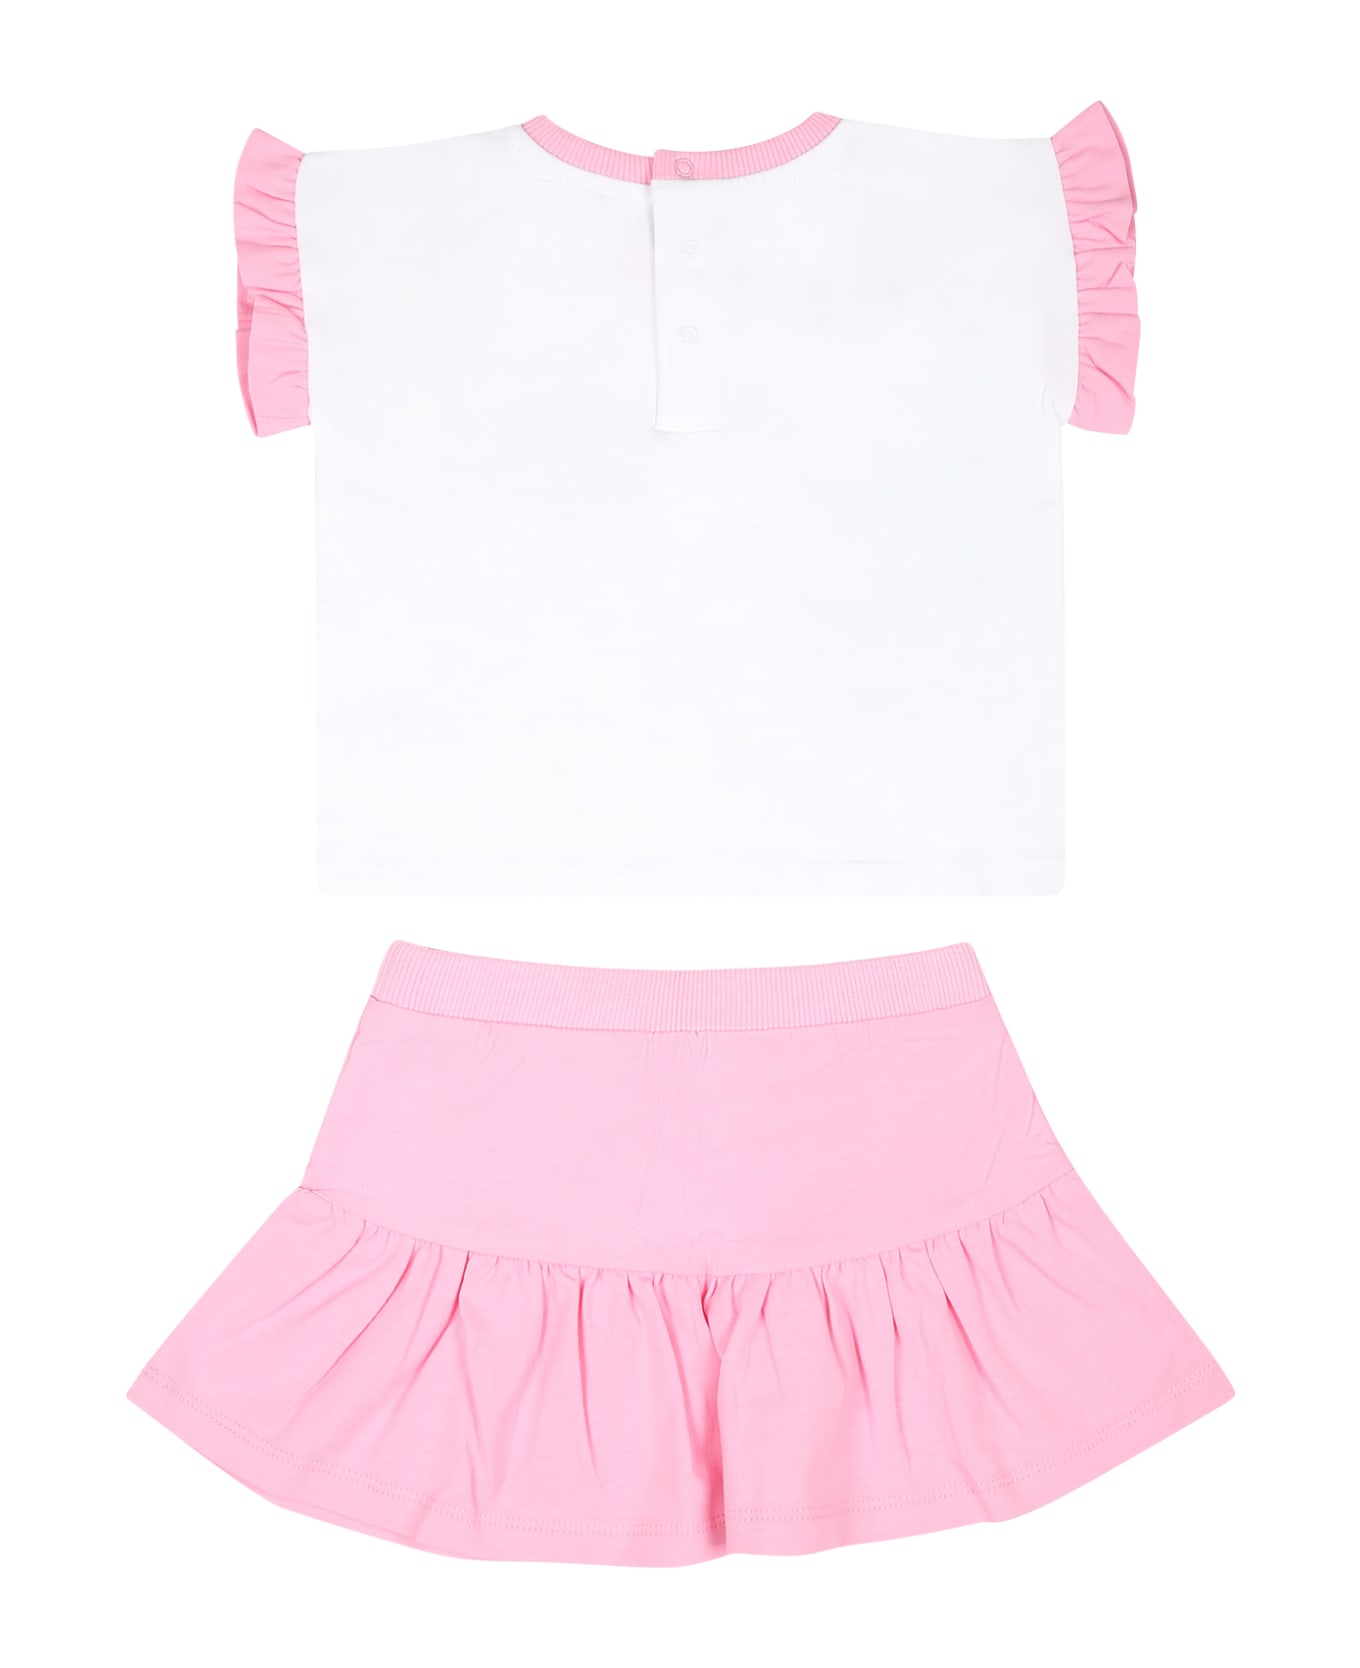 Moschino Pink Suit For Baby Girl With Teddy Bear - Pink